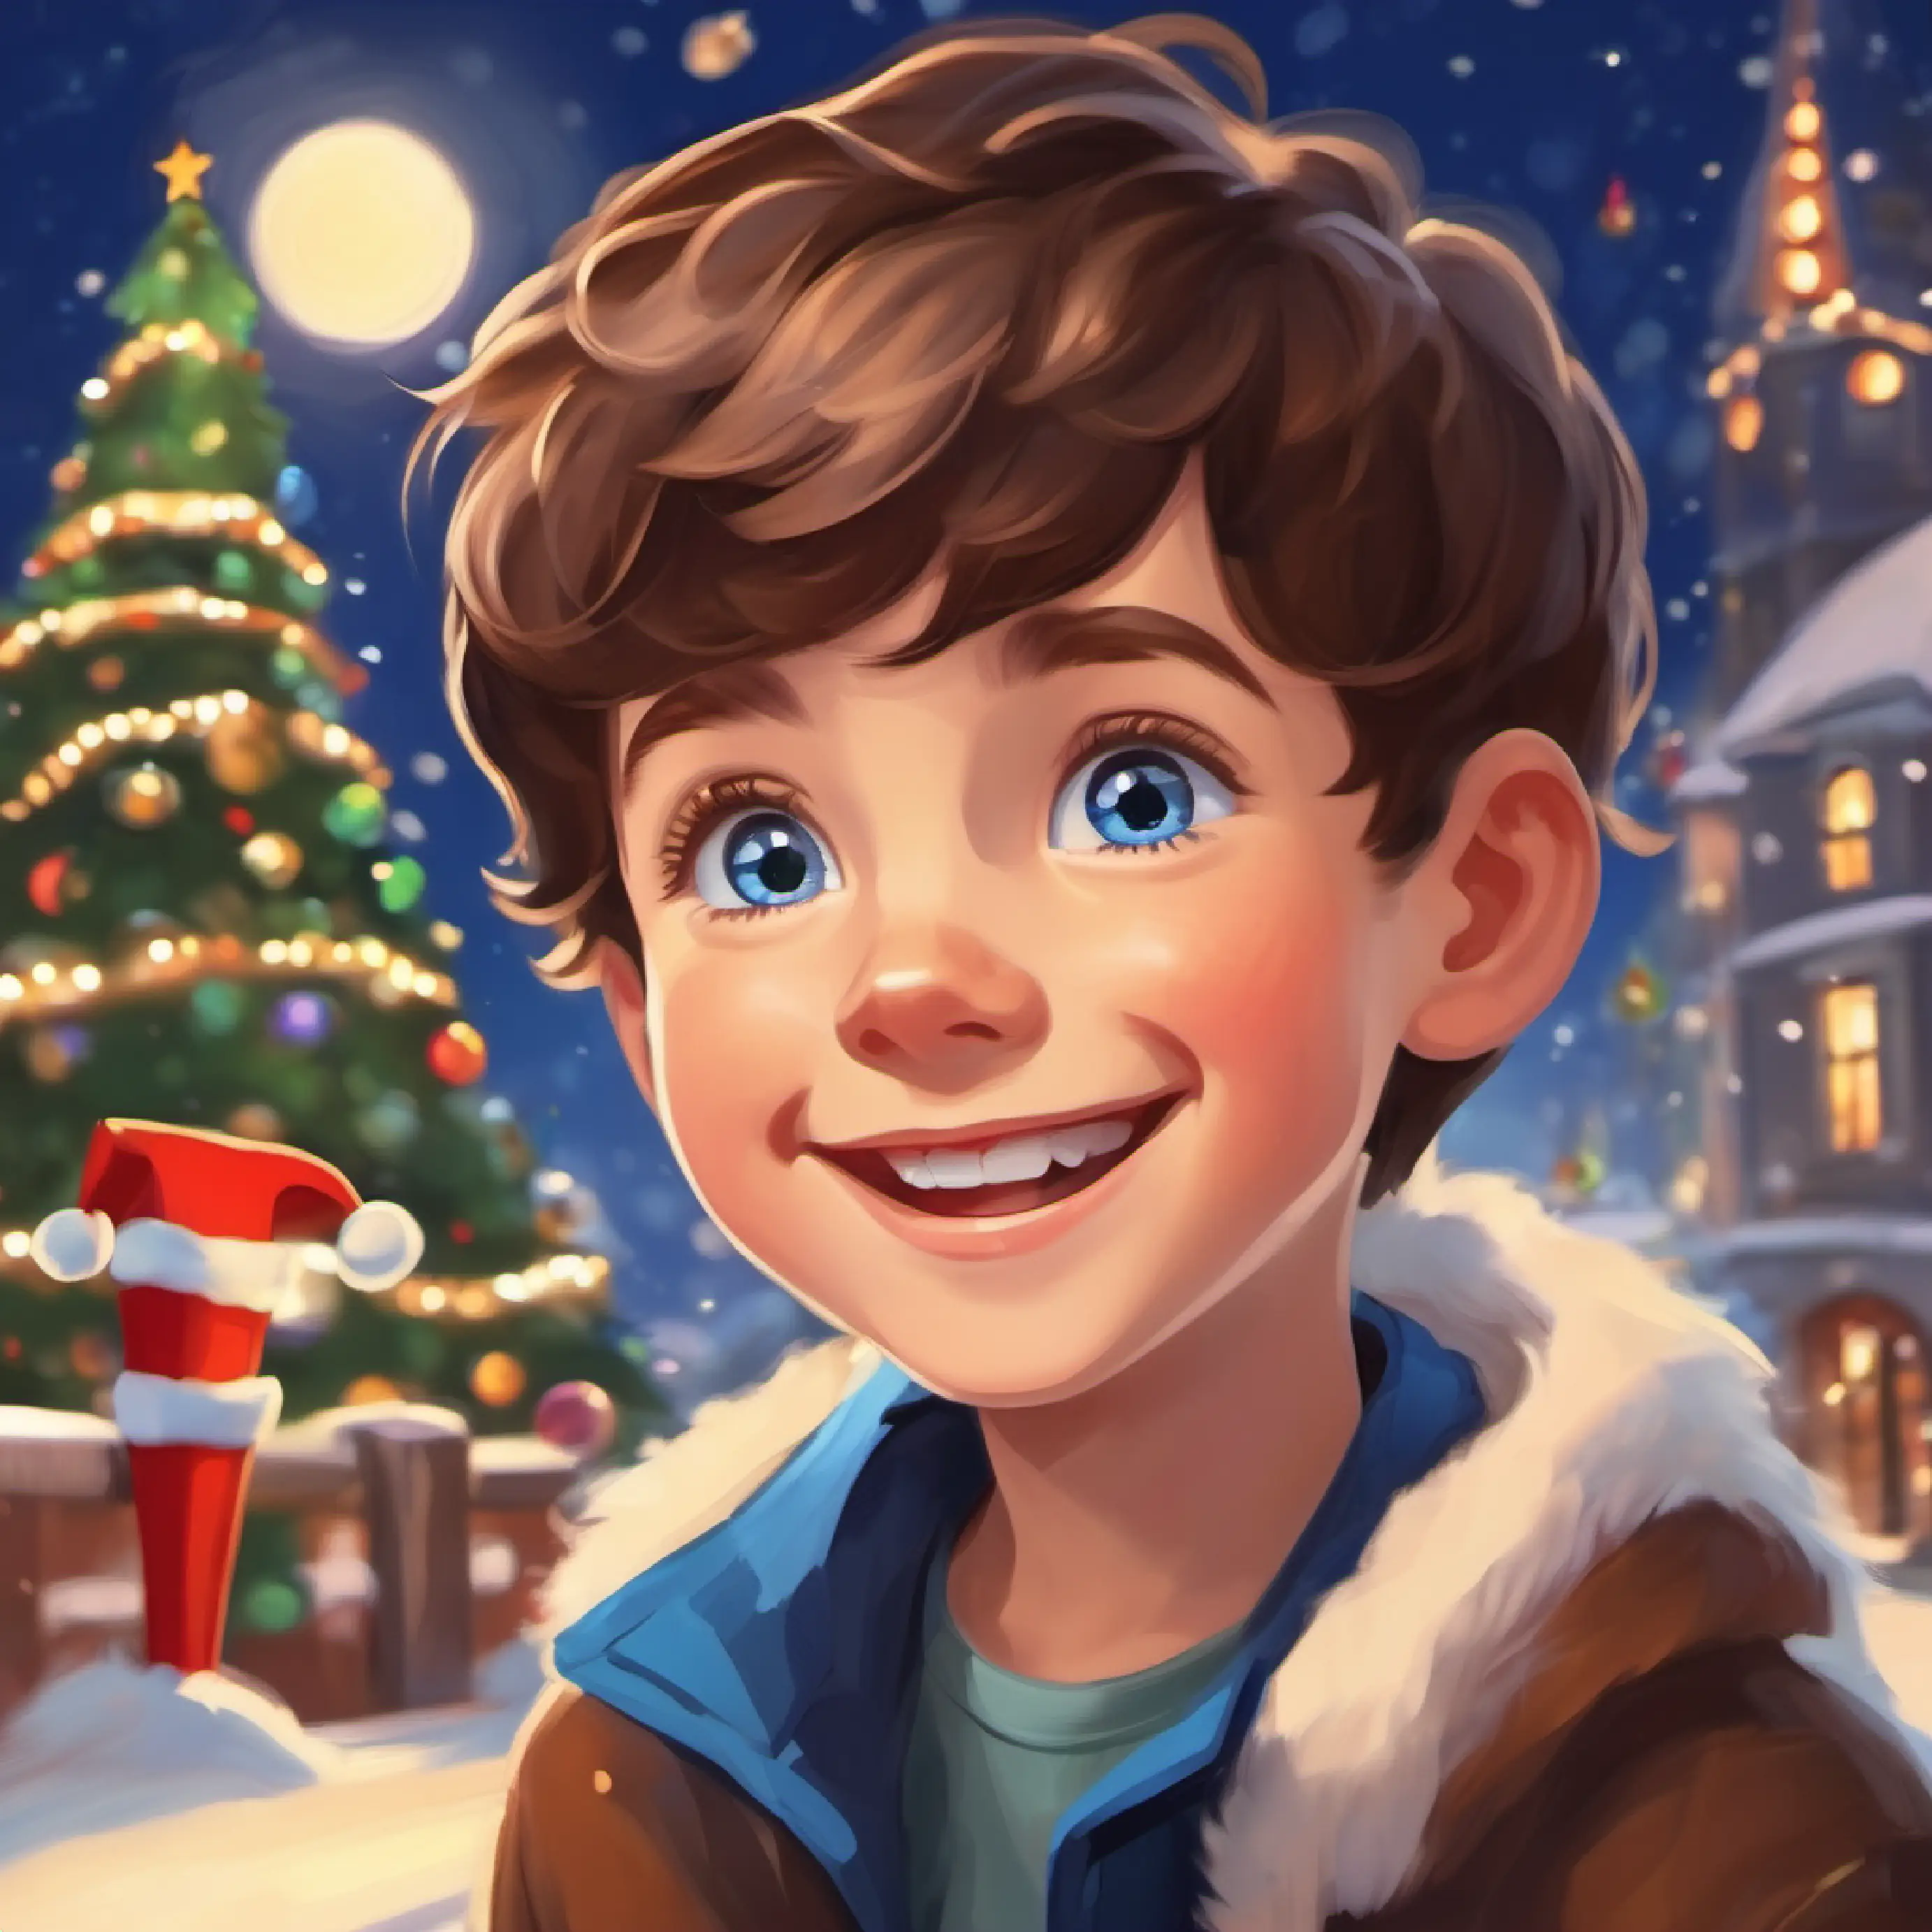 Happy boy with blue eyes, short brown hair, often smiling sharing with friends, playing happily.